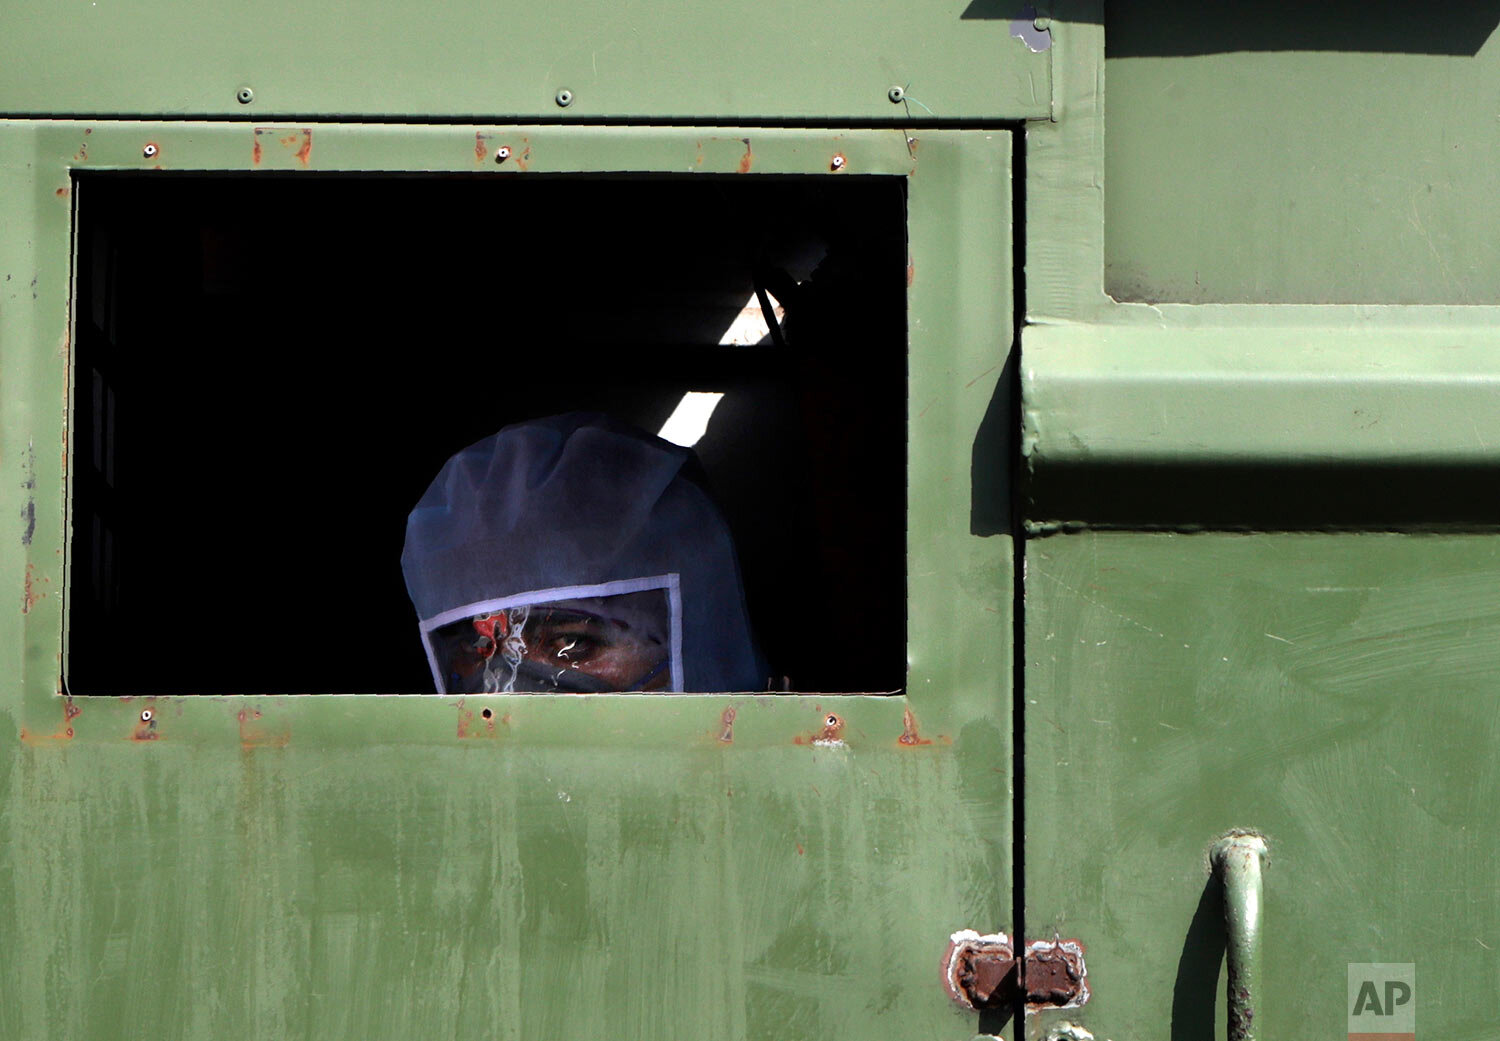  A civic worker sits inside a garbage truck carrying waste material from quarantine centers and hospitals treating COVID-19 patients in Mumbai, India, Friday, April 10, 2020. (AP Photo/Rajanish Kakade) 